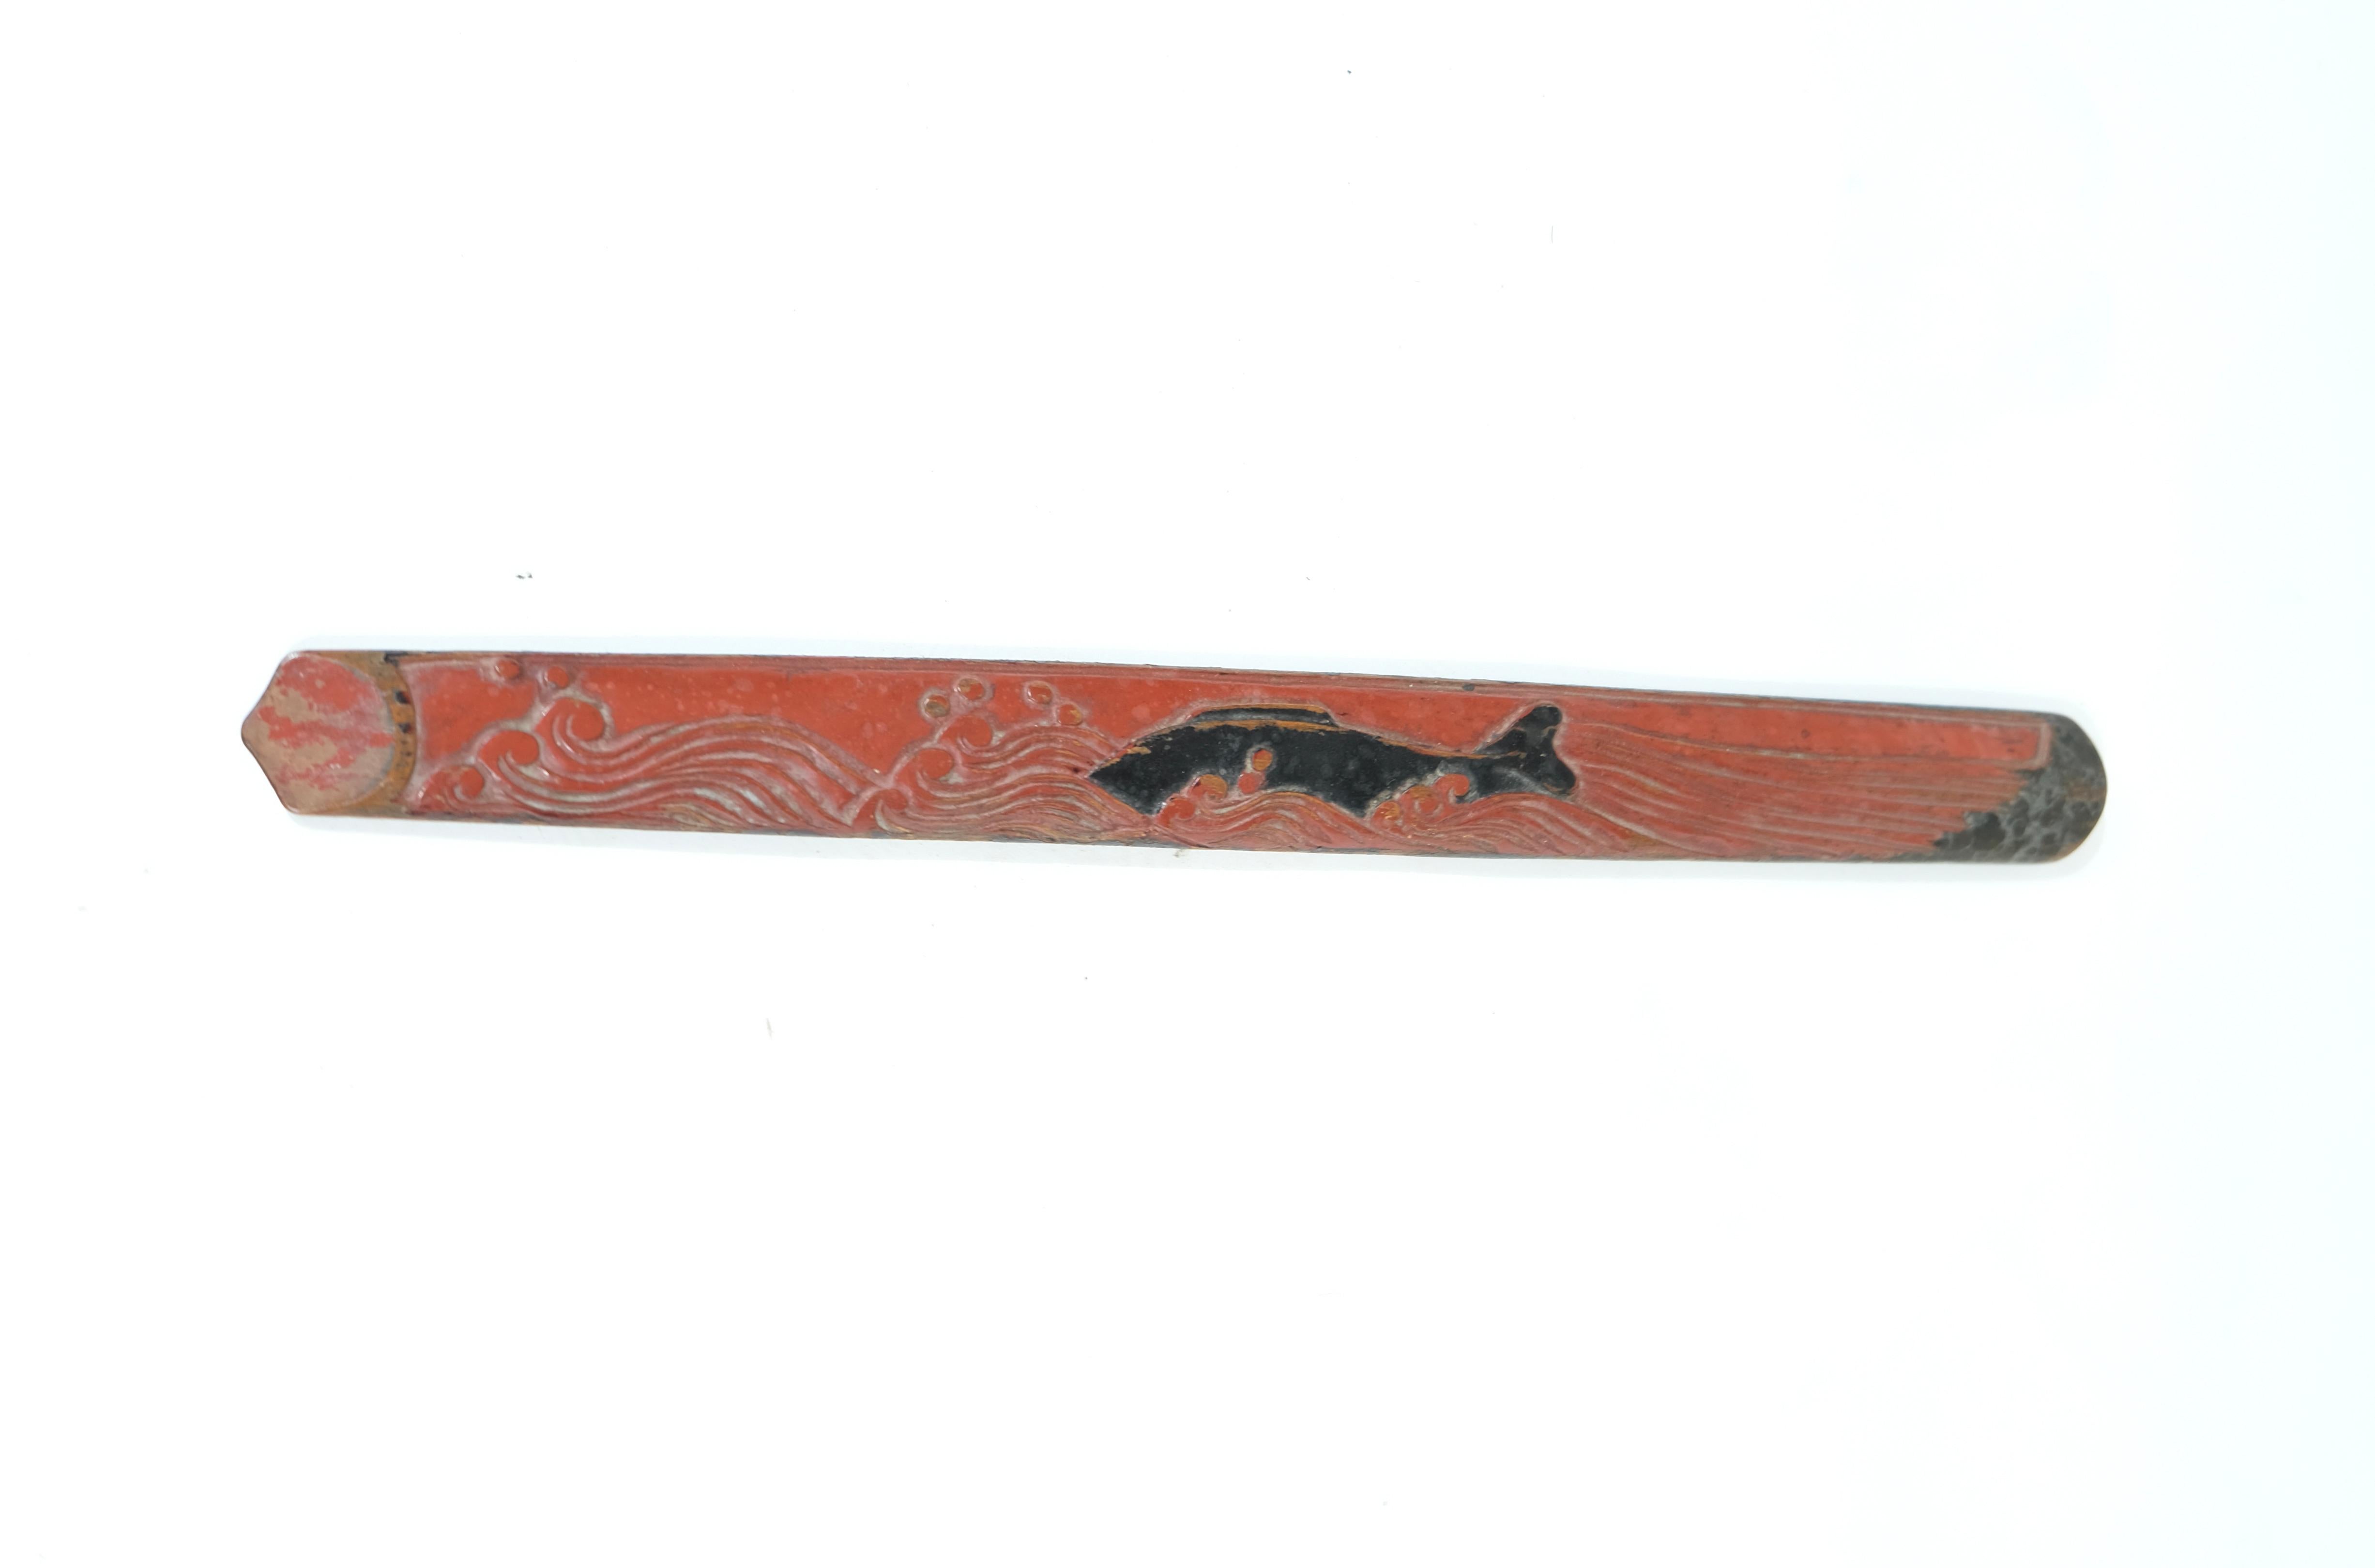 Edo Ikupasuy, Wooden Carved Ceremonial Stick Used by Ainu Men When Making Offeri